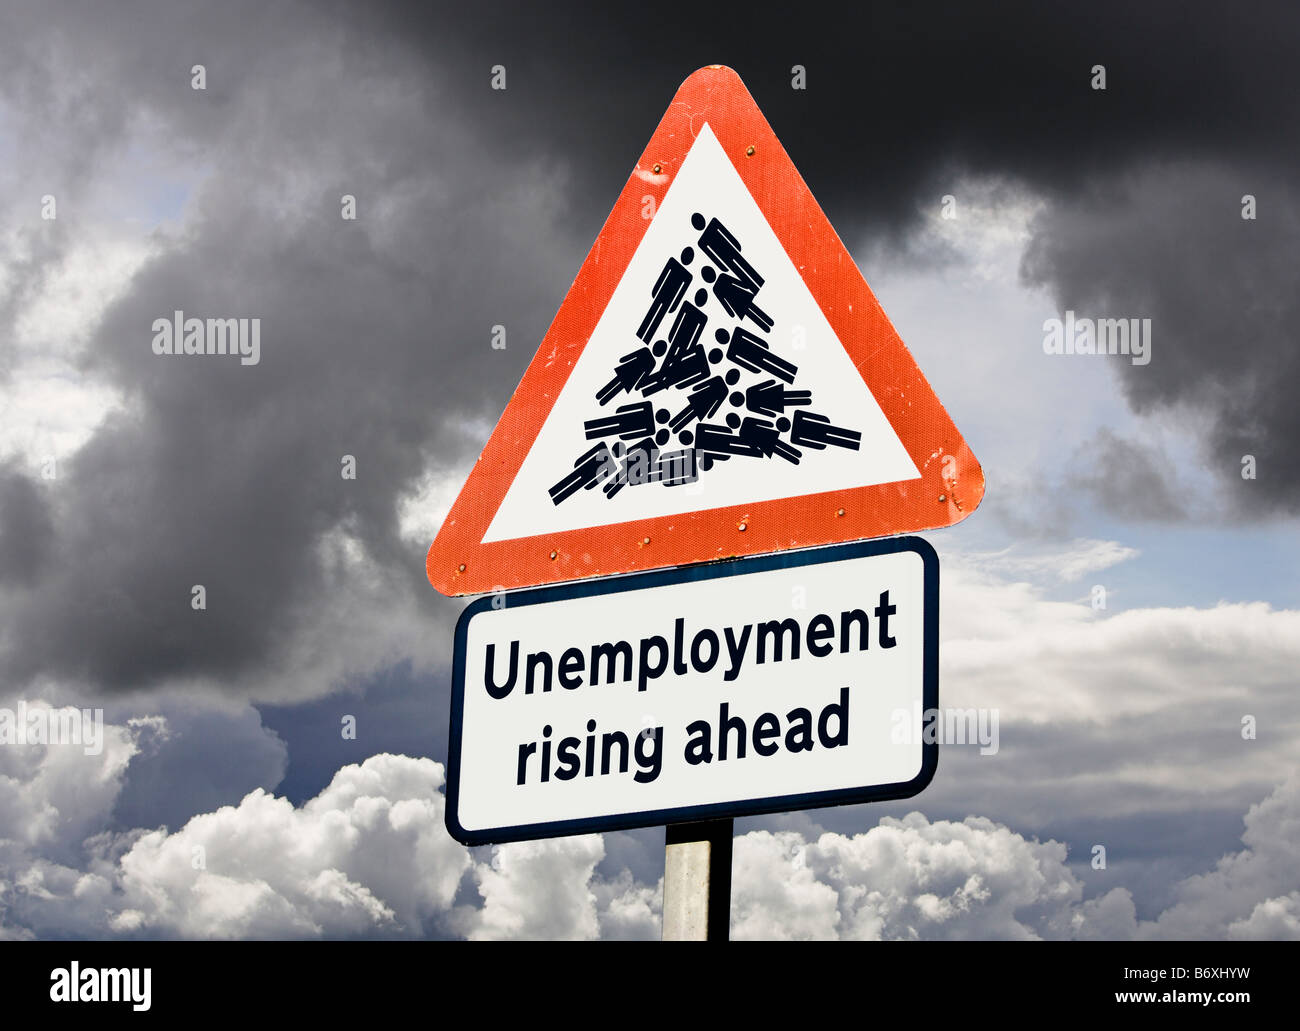 Concept sign for rising unemployment job losses UK against a stormy sky Stock Photo